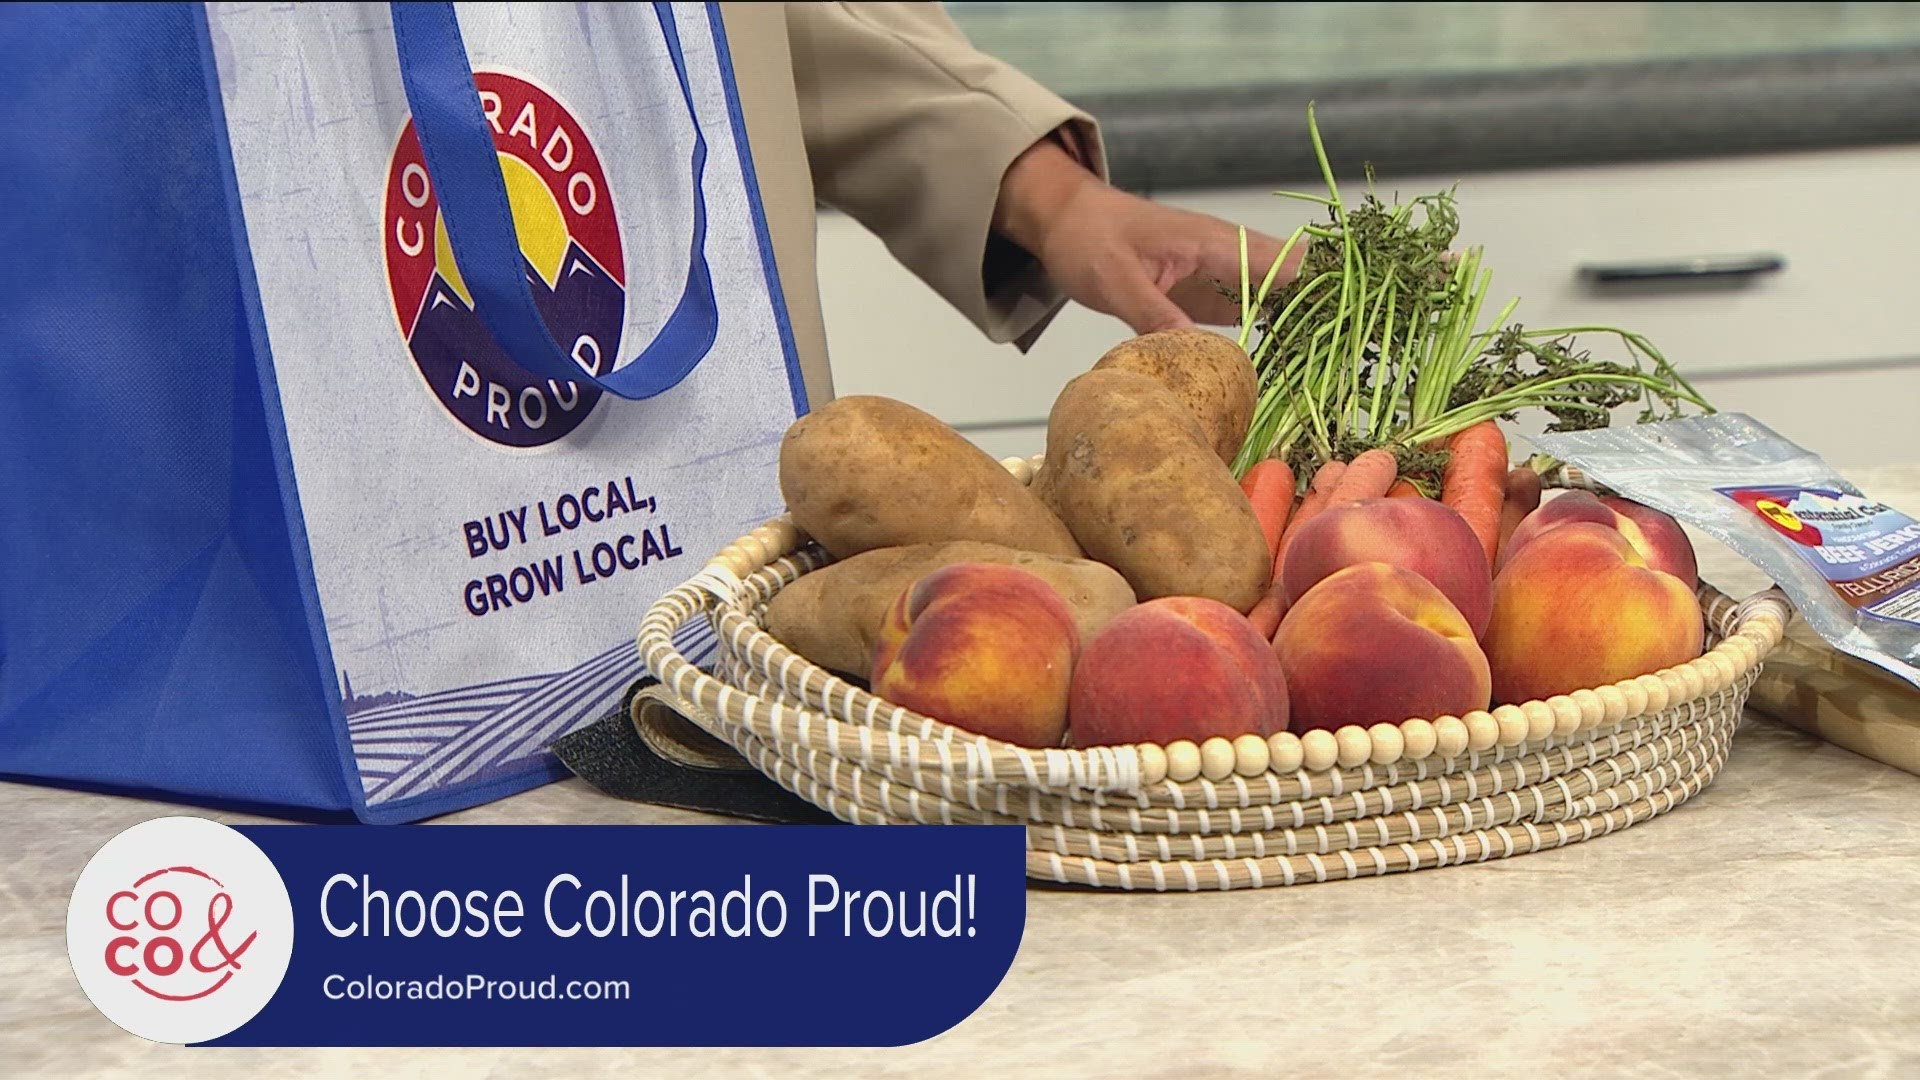 Visit ColoradoProud.com to get details on local farms and where you can buy the freshest Colorado-grown produce.